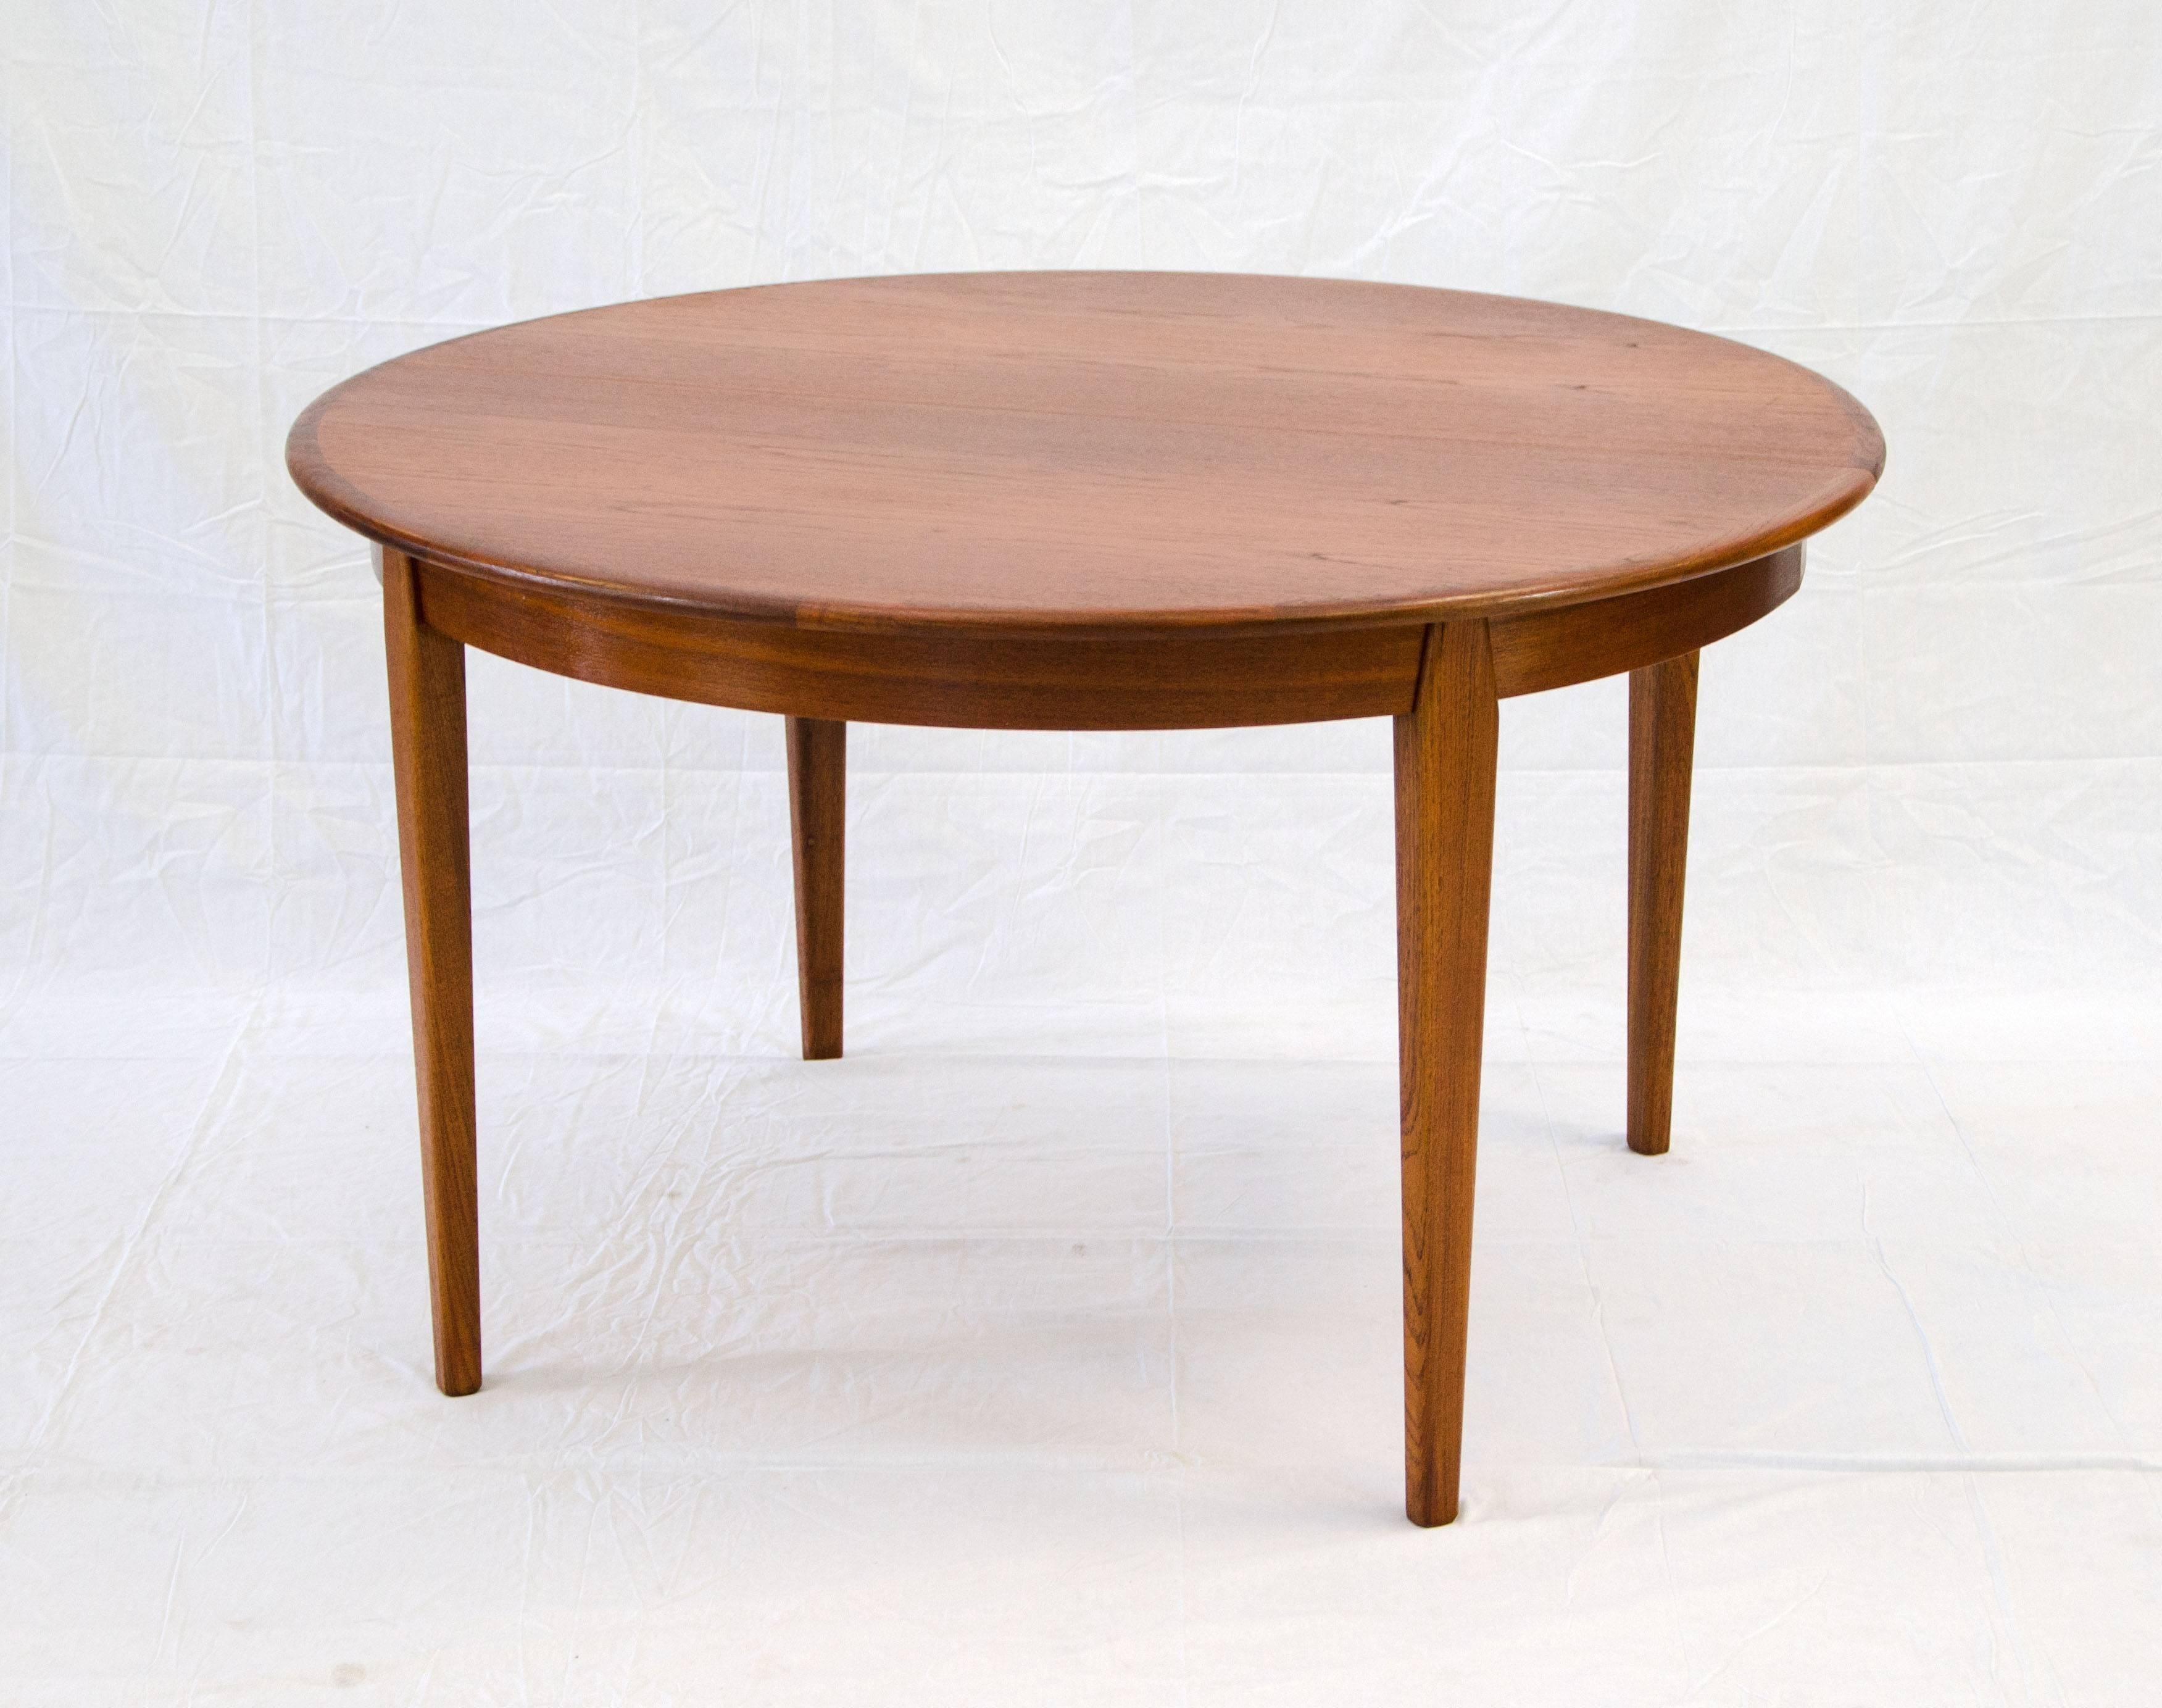 Beautiful circular Danish teak dining table with accent edge and three 23 1/2